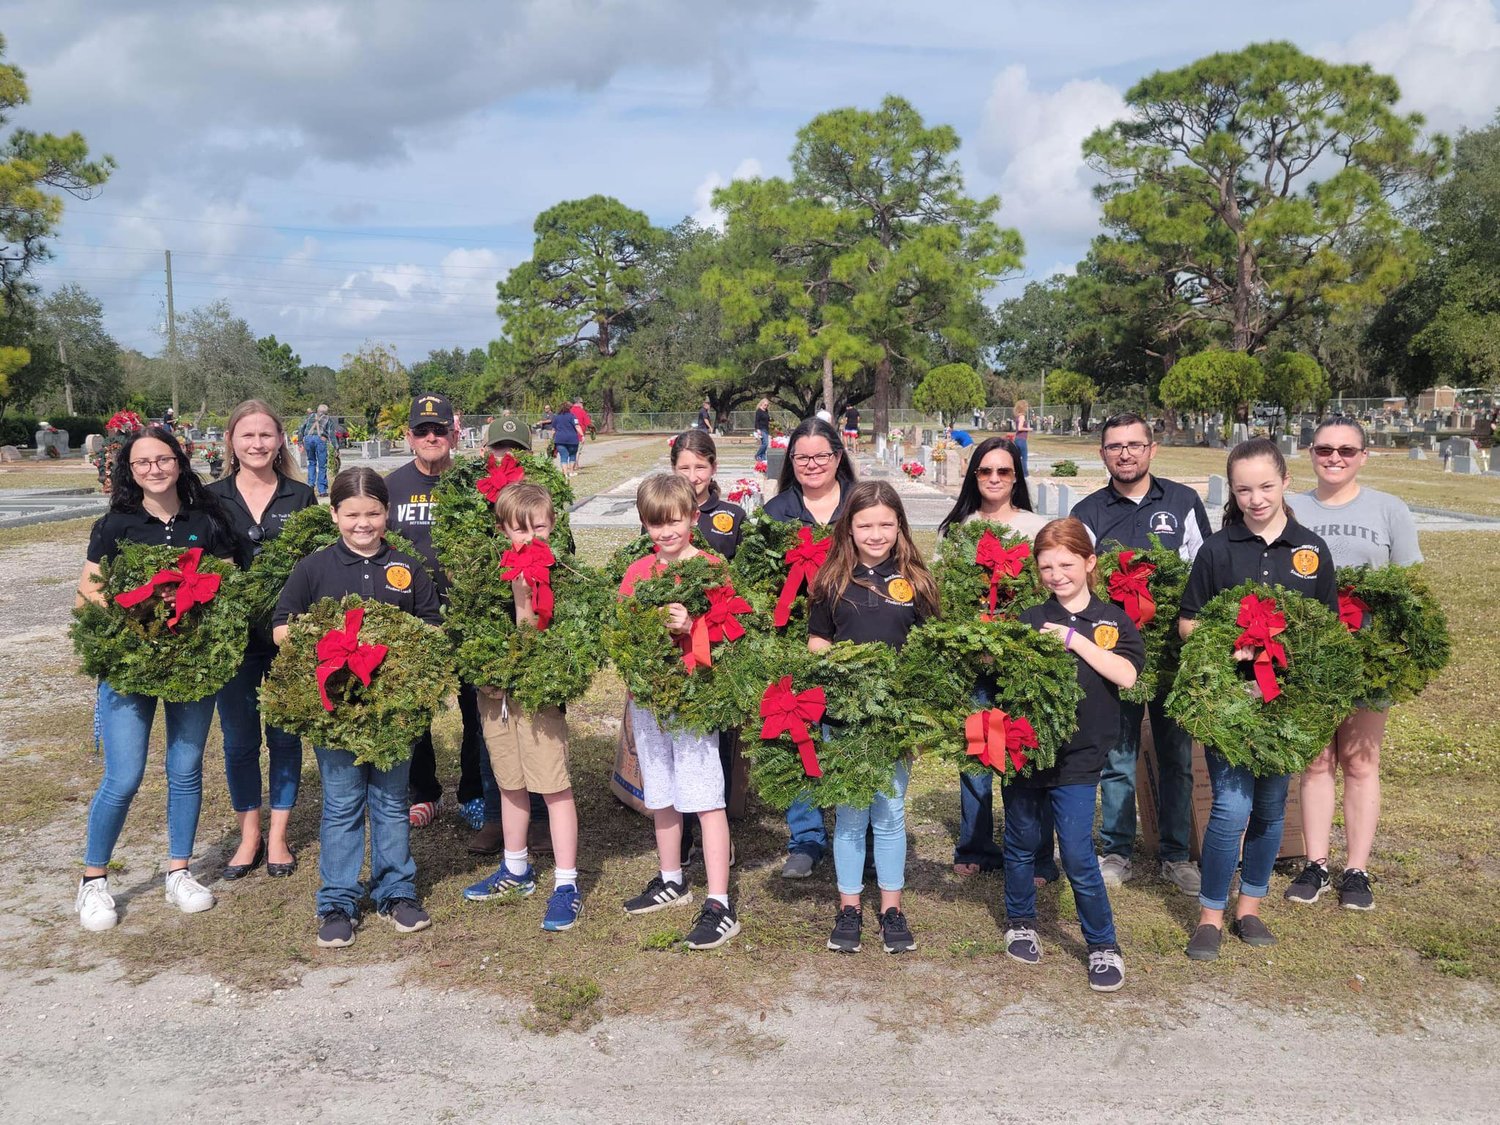 North Elementary School students take part in the Wreaths Across America ceremony.